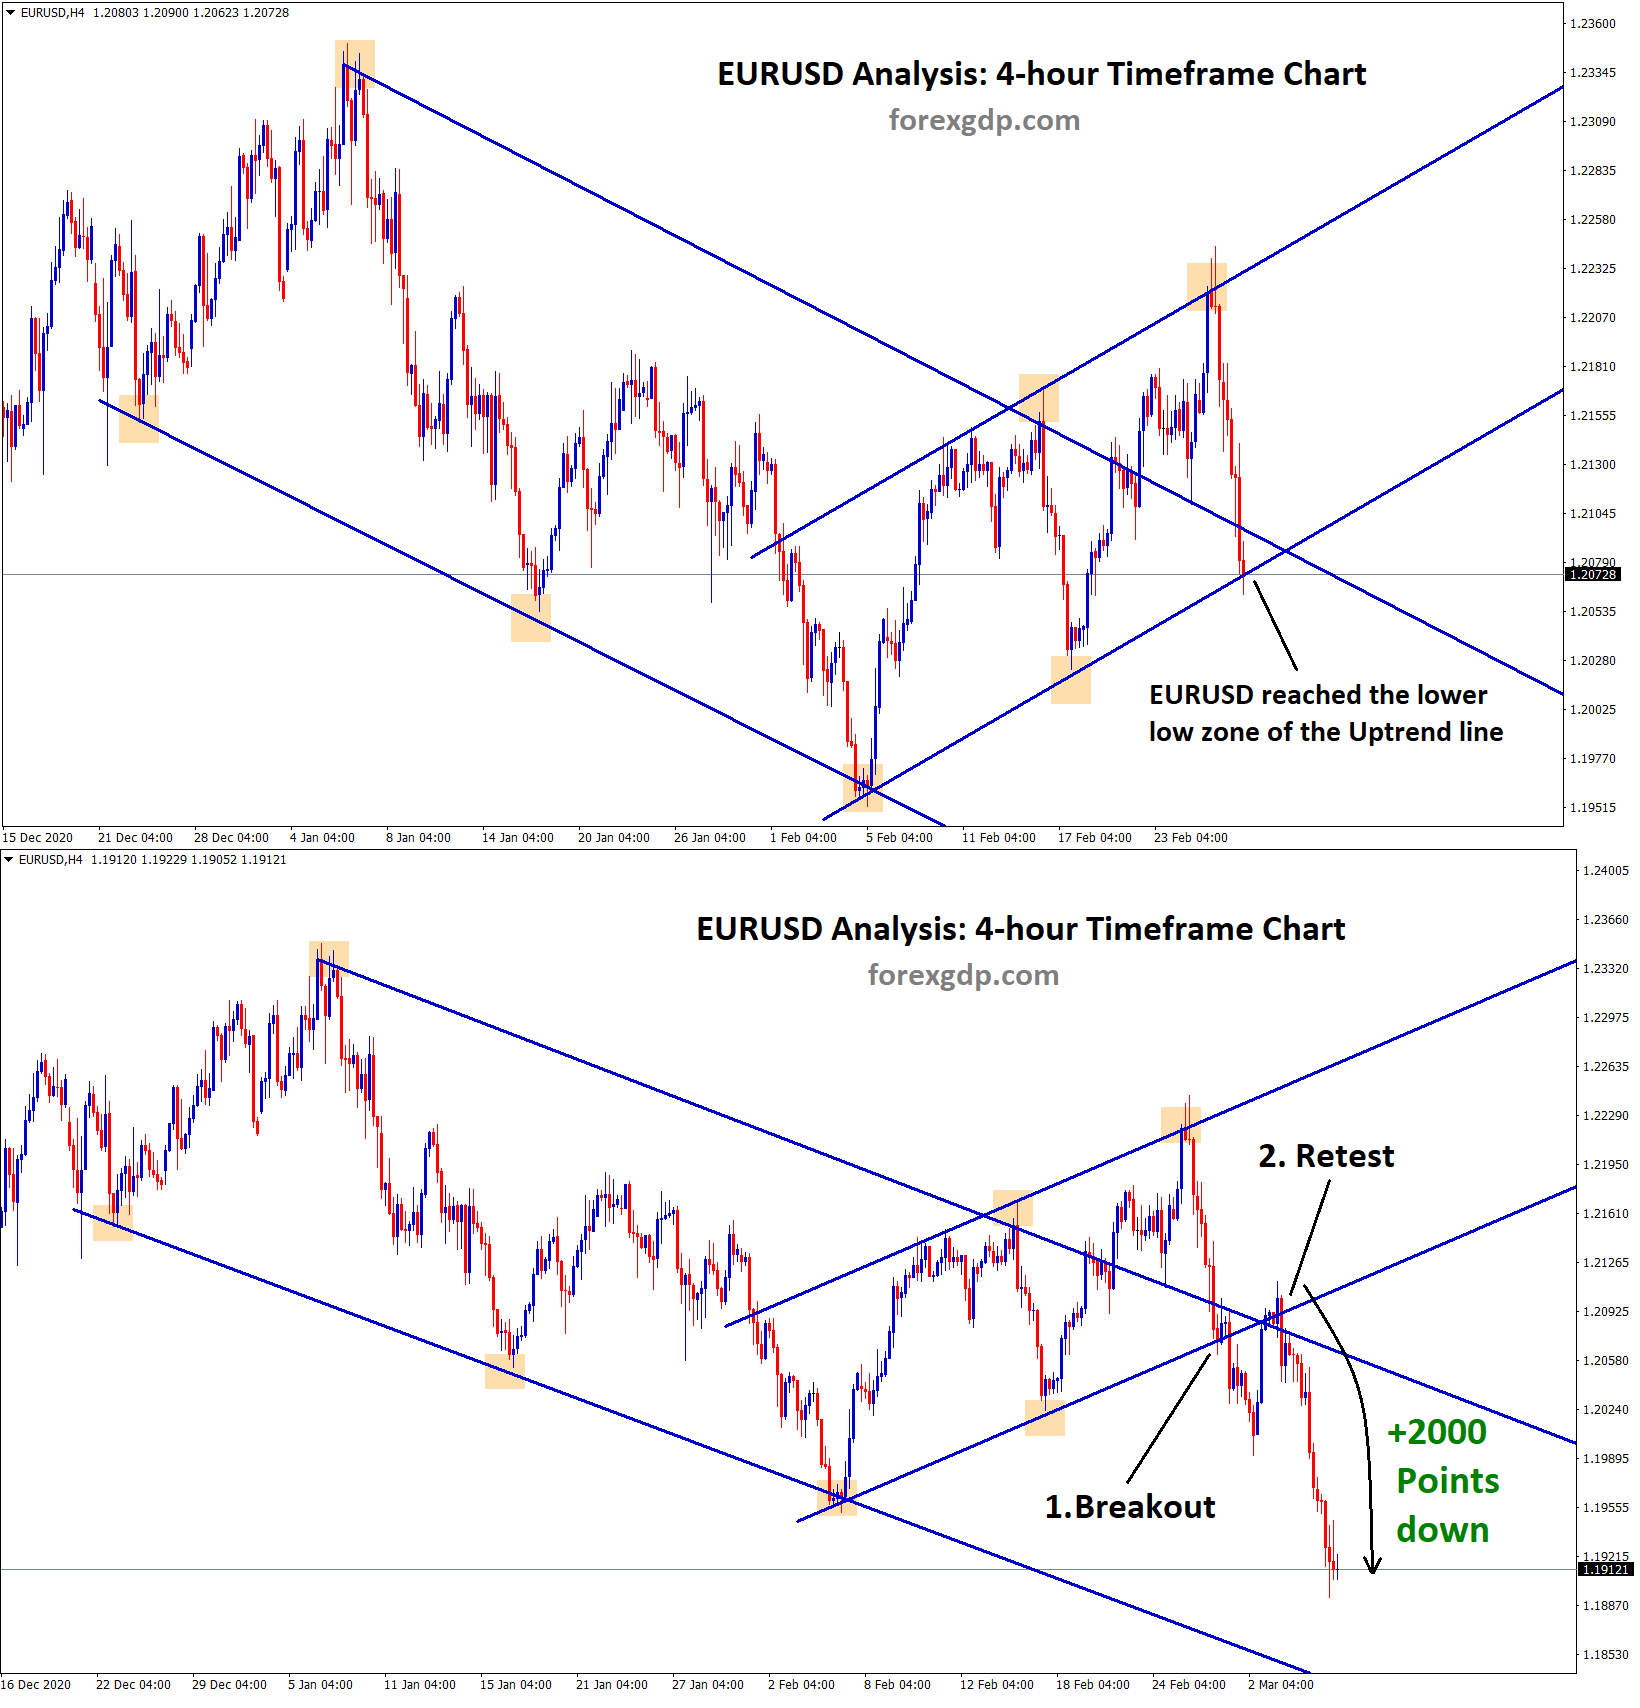 eurusd fall down 2000 poitns after retesting the broken level of the uptrend line